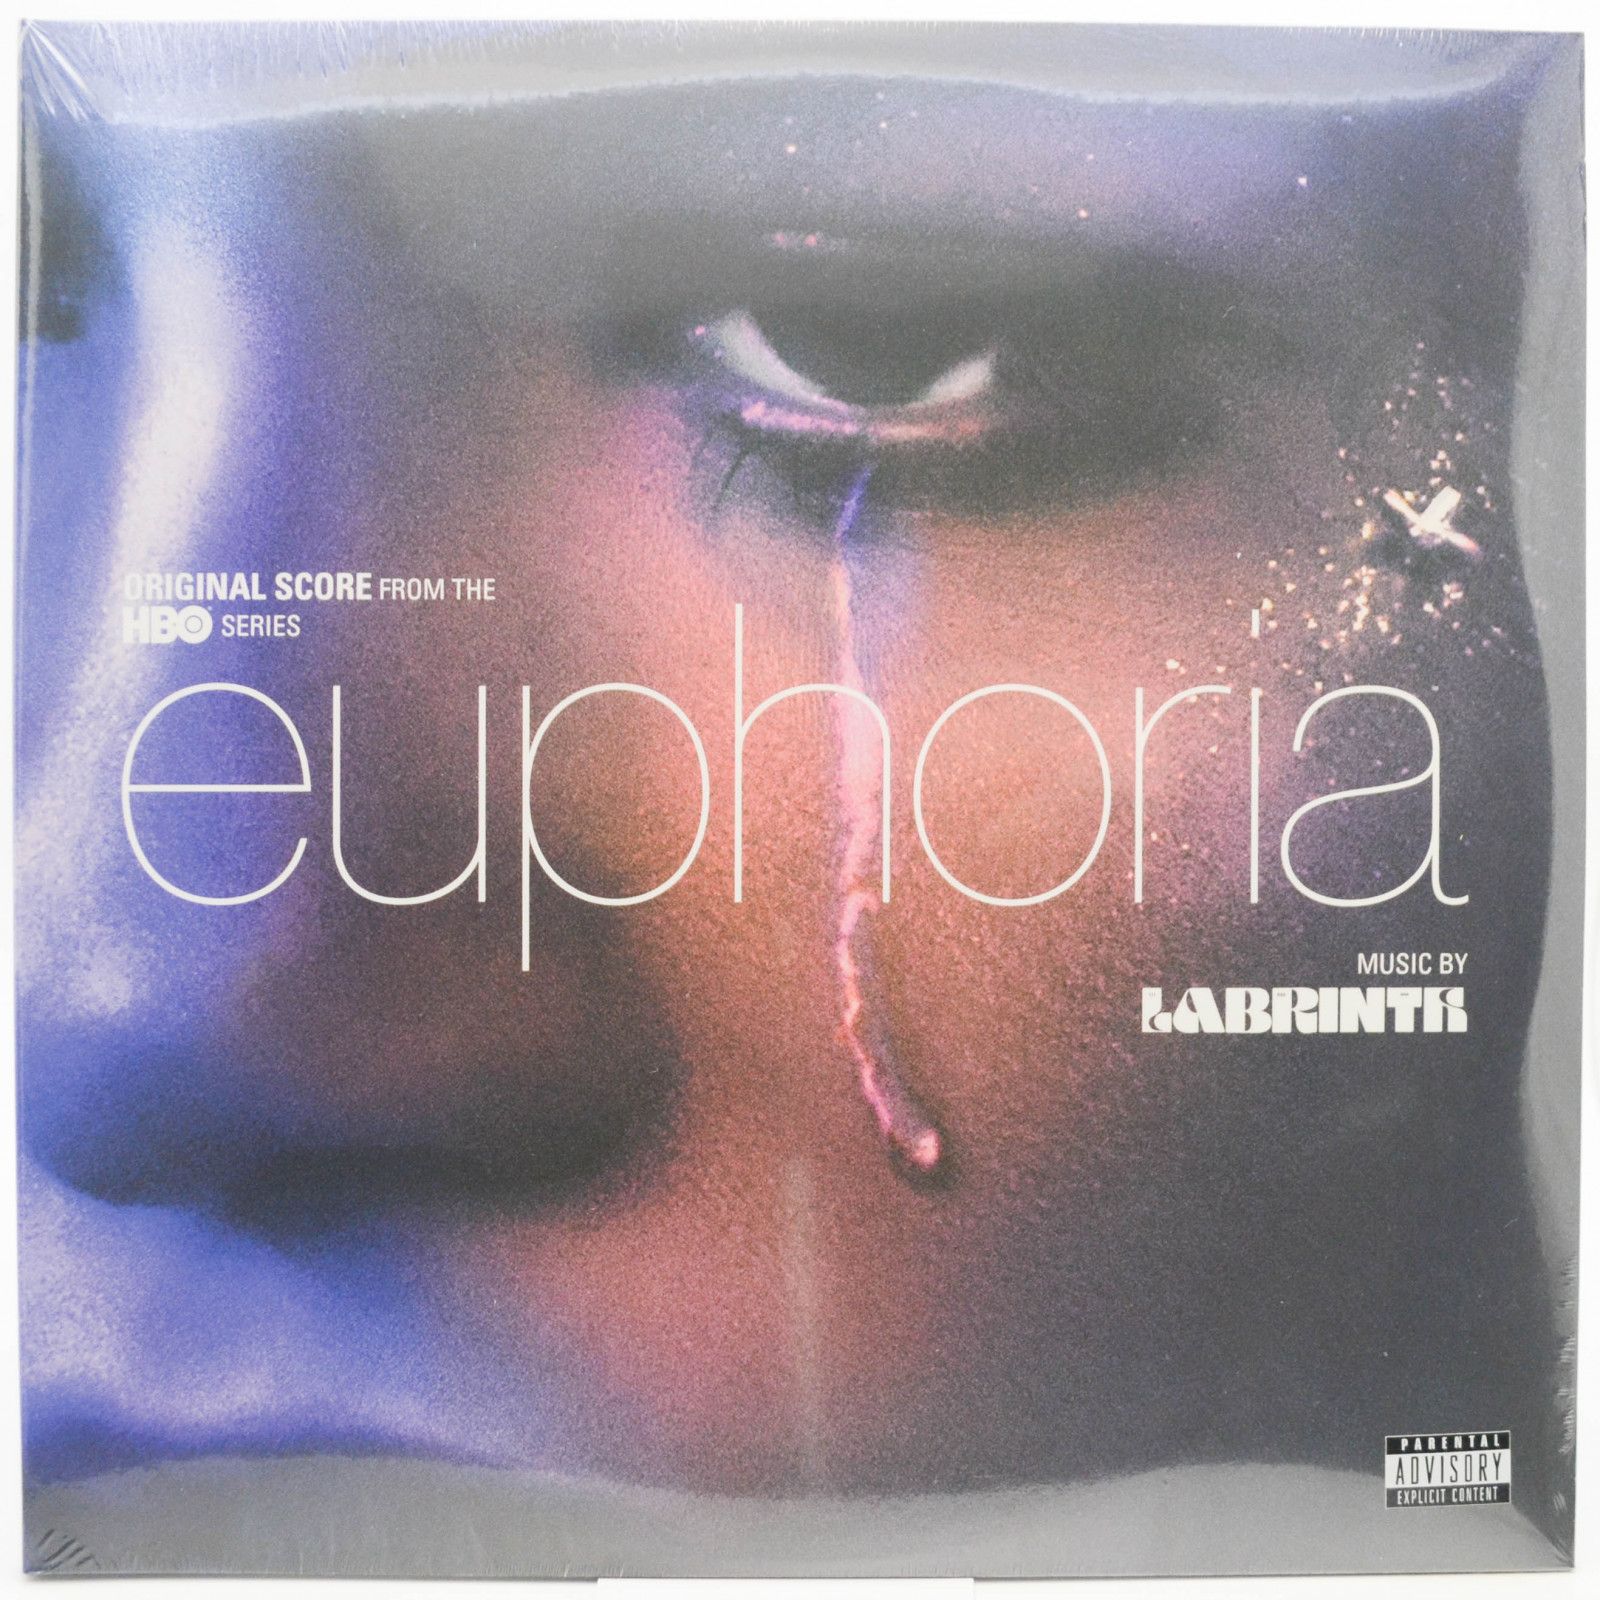 Labrinth — Euphoria (Original Score From The HBO Series) (2LP), 2020